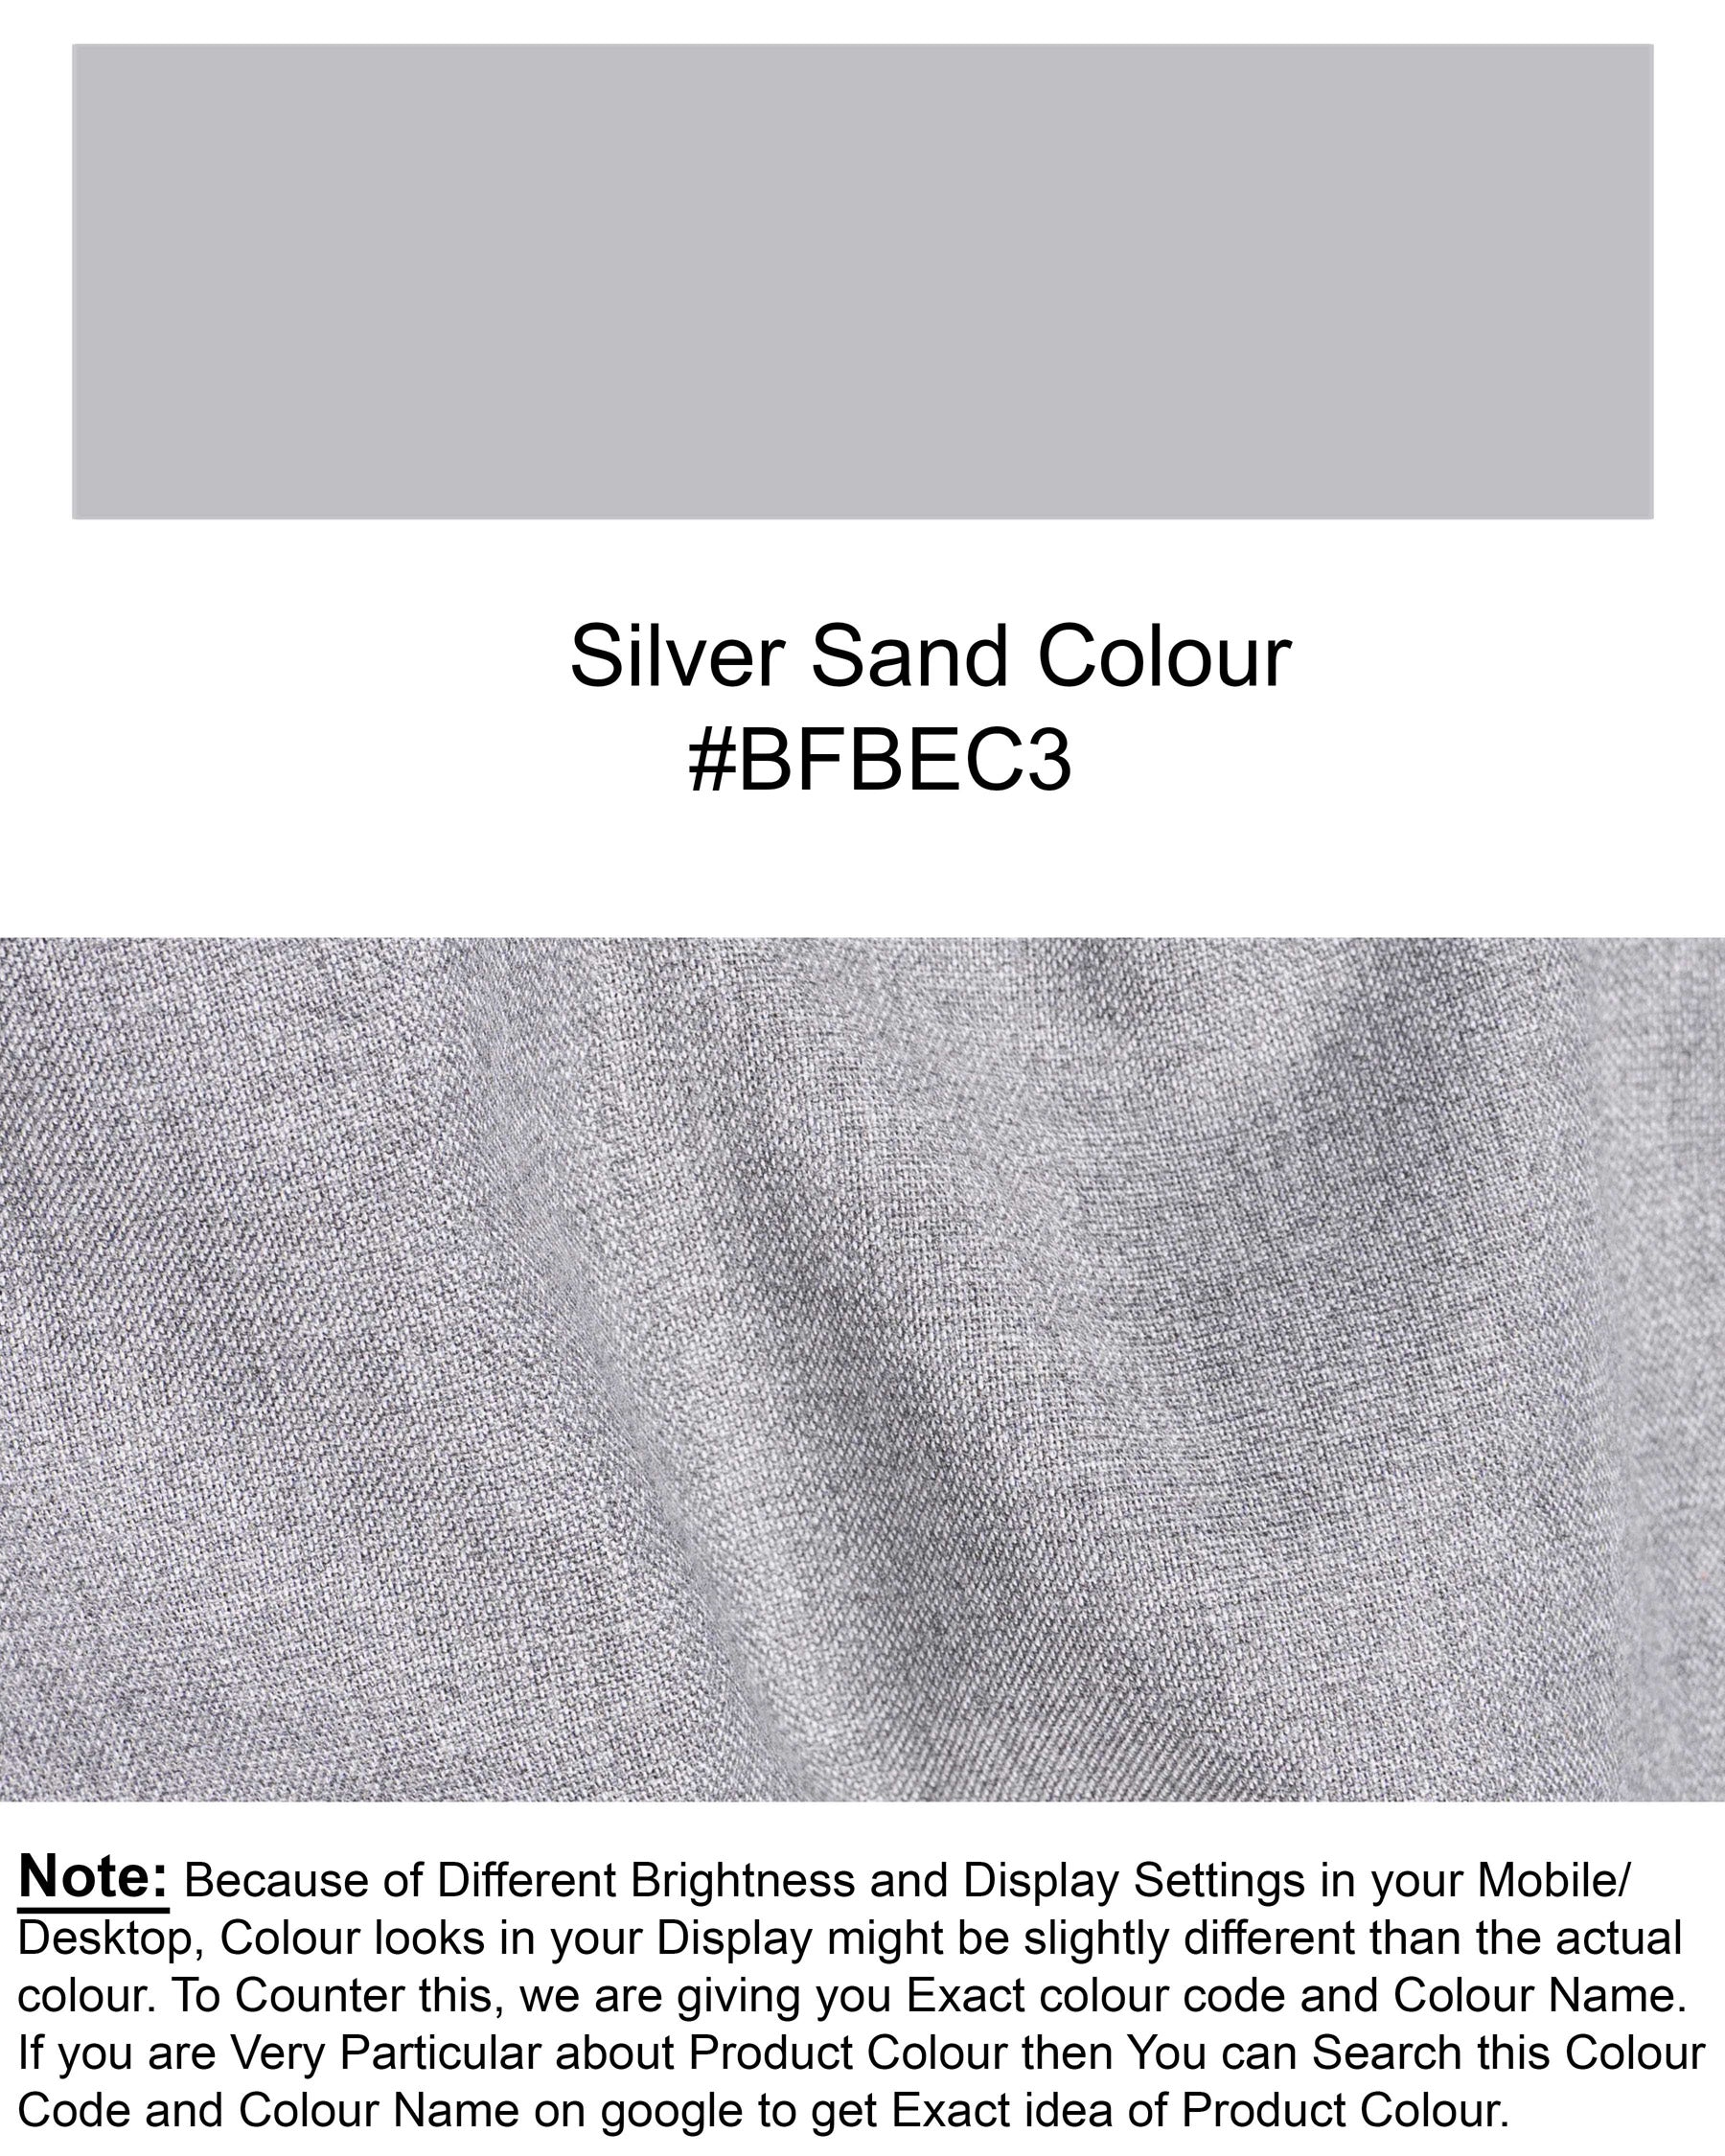 Silver Sand Grey Double-BreaBled Wool Rich Blazer BL1529-DB-36, BL1529-DB-38, BL1529-DB-40, BL1529-DB-42, BL1529-DB-44, BL1529-DB-46, BL1529-DB-48, BL1529-DB-50, BL1529-DB-52, BL1529-DB-54, BL1529-DB-56, BL1529-DB-58, BL1529-DB-60